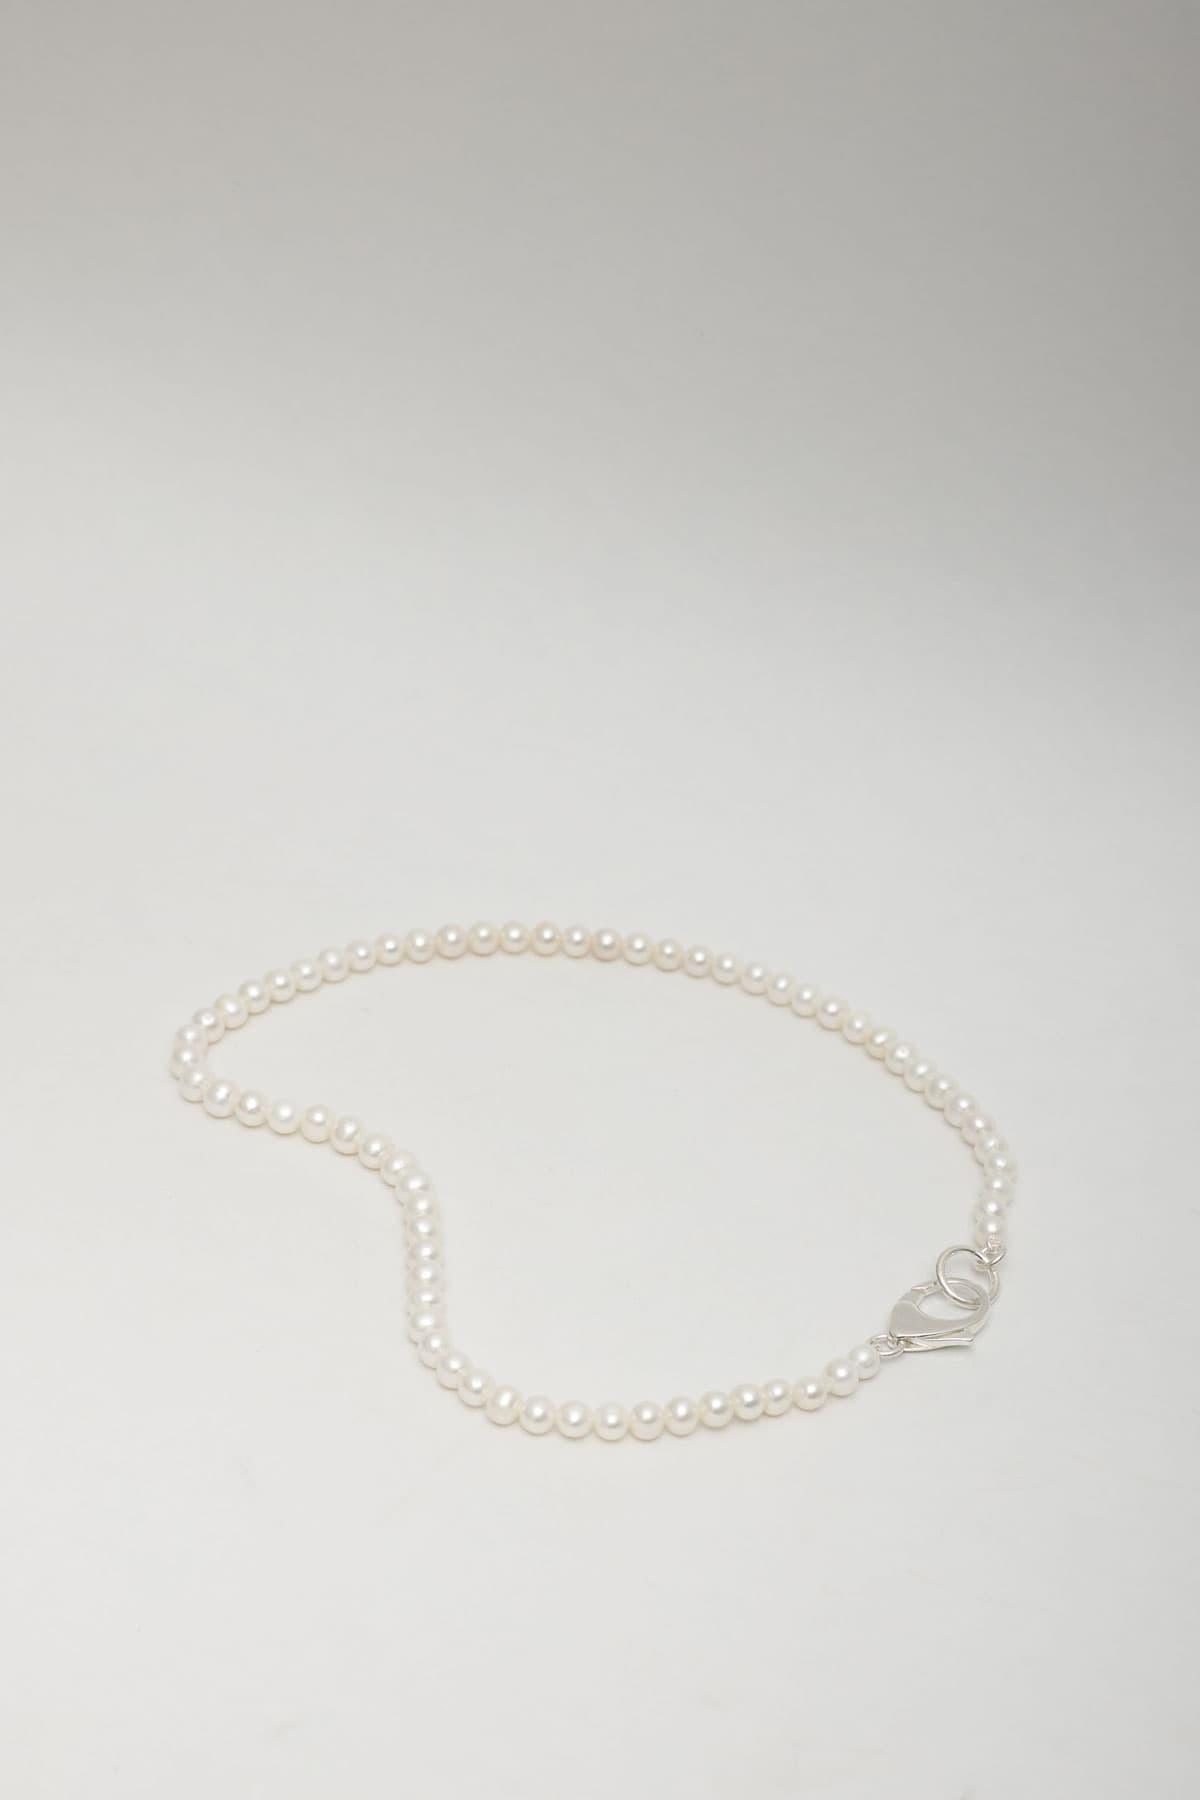 HATTON LABS STERLING SILVER WHITE PEARL LOBSTER CHAIN IAMNUE